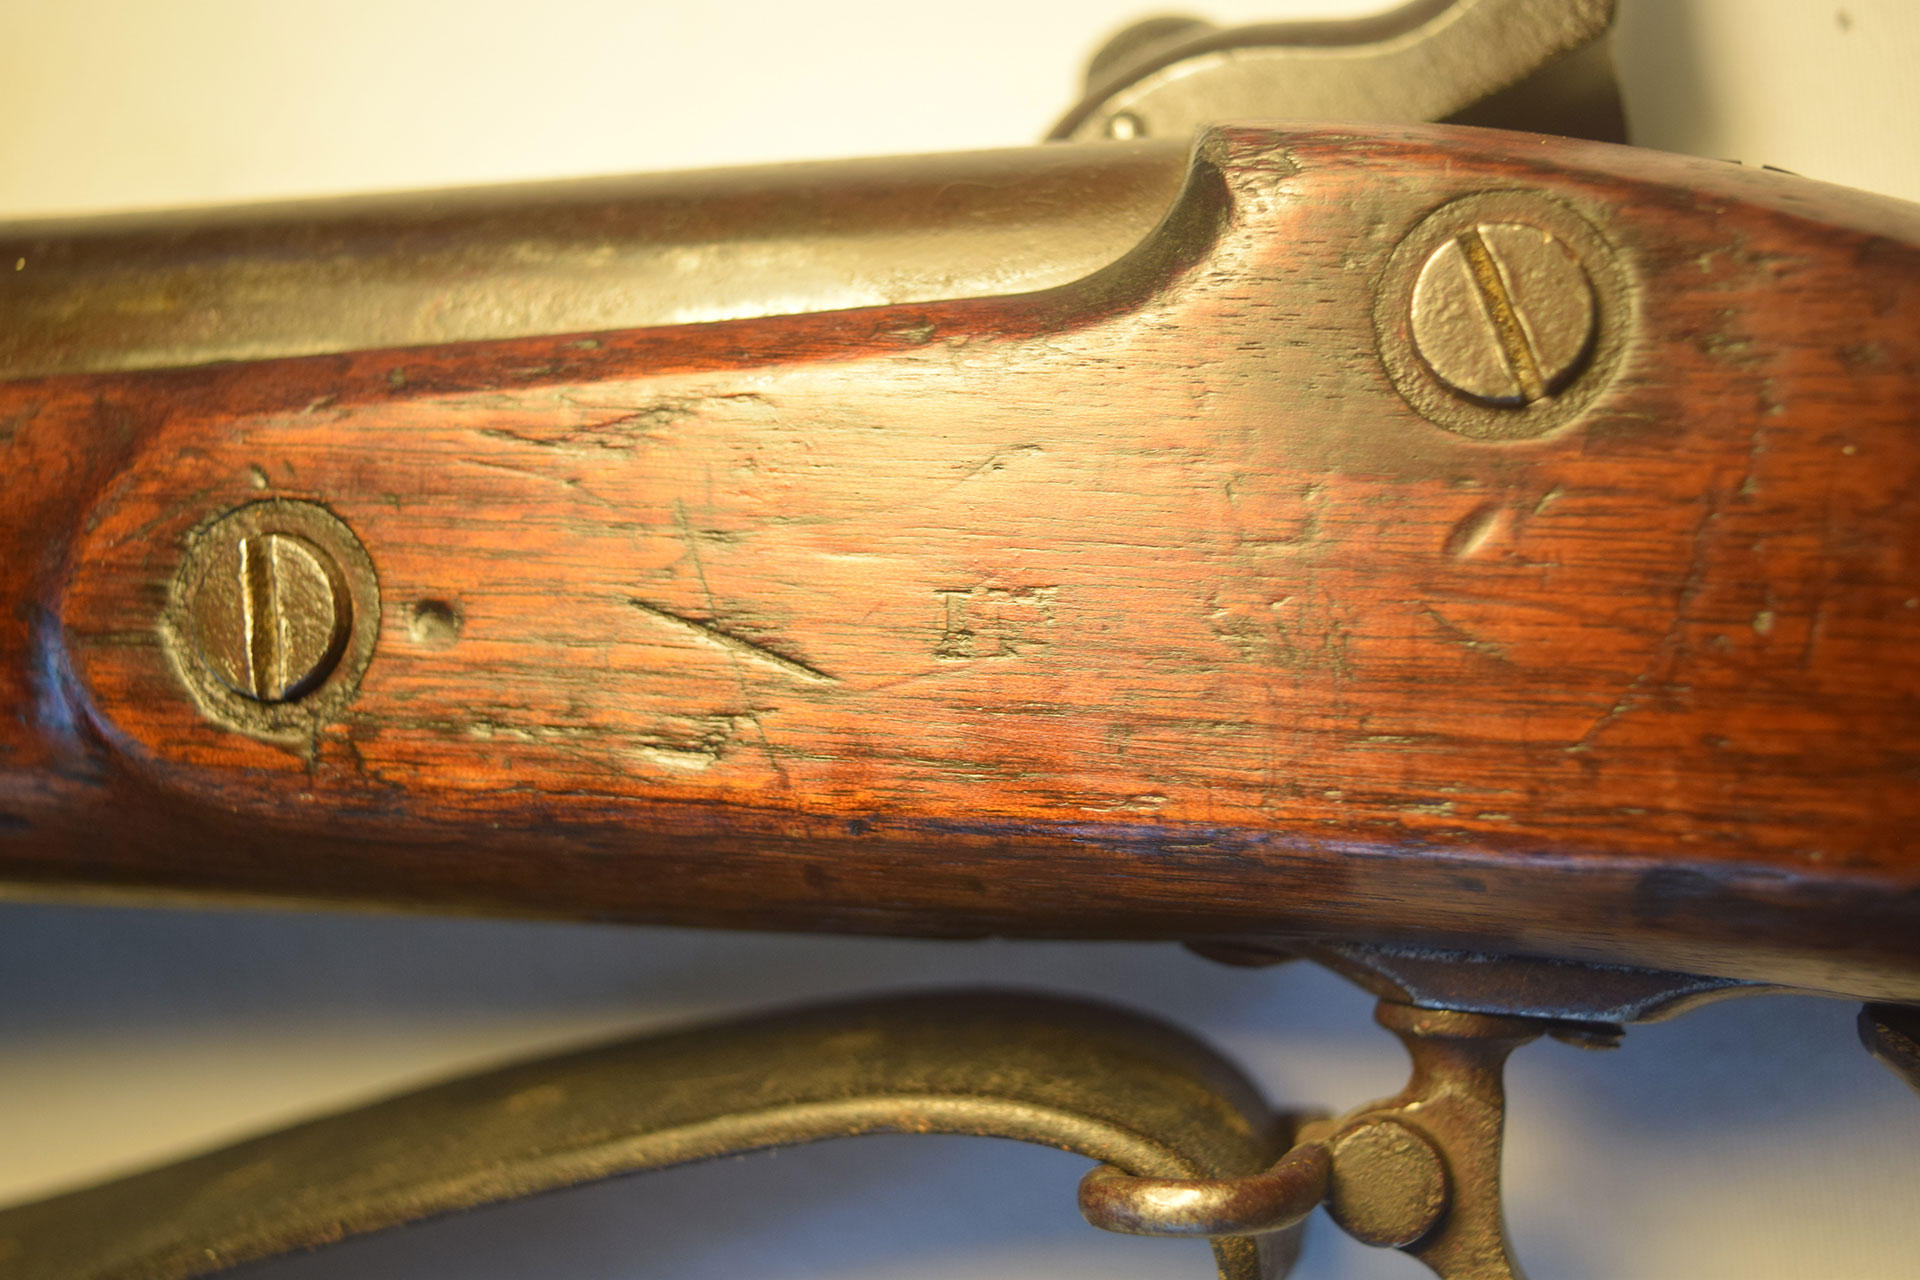 The “IN” (“Irish Nation”) marking was applied to 6,500 of the Bridesburg rifle-muskets that Jenks delivered to the “Roberts/Sweeny” wing of the Fenian Brotherhood in March, April,and May 1866. Courtesy of the author.